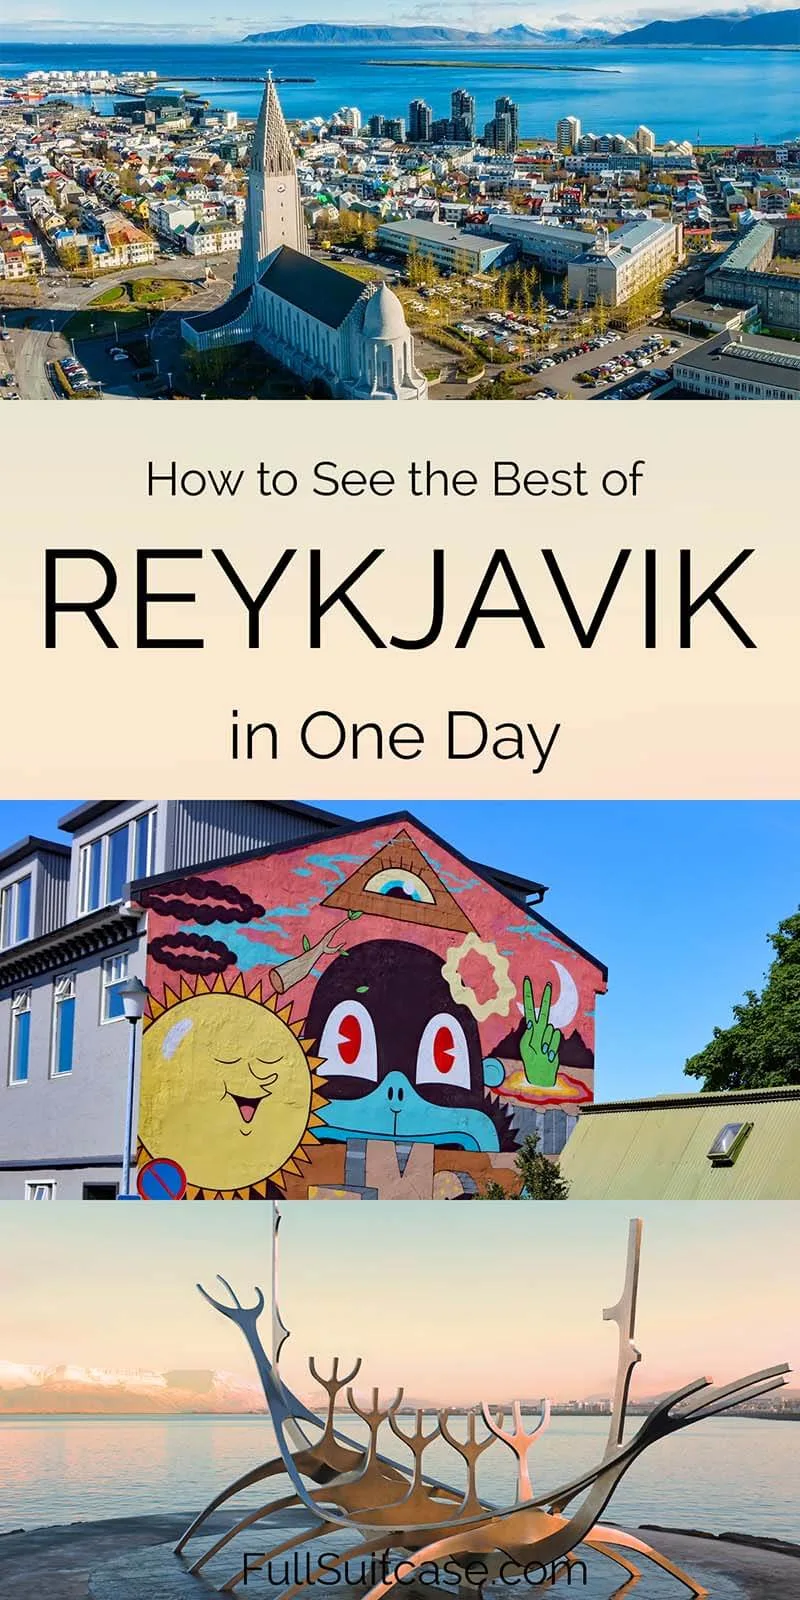 What to see in Reykjavik in one day